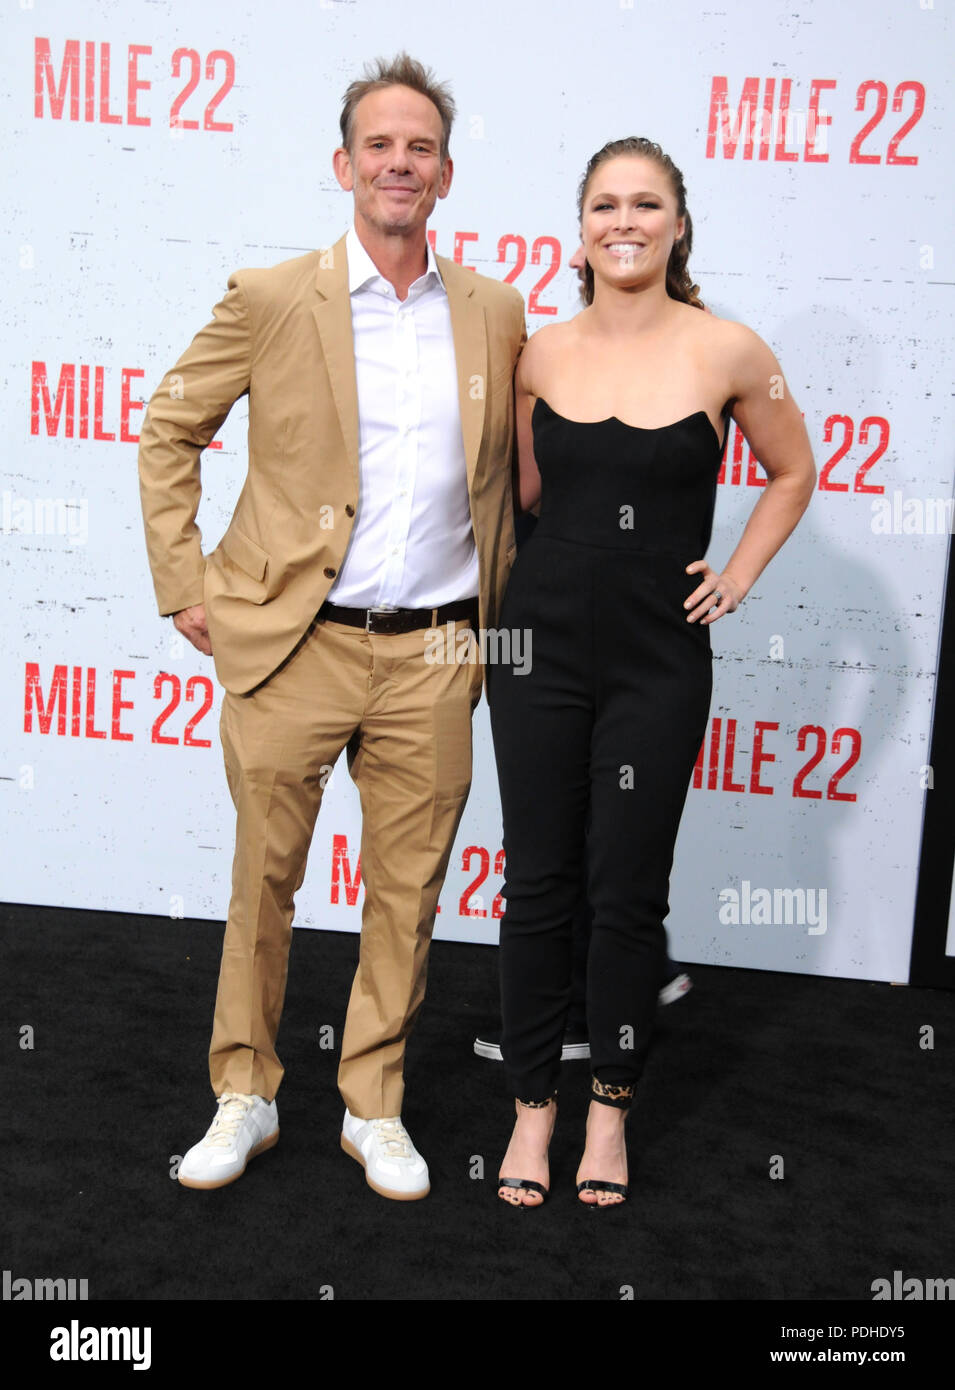 WESTWOOD, CA - AUGUST 09: Director Peter Berg and actress Ronda Rousey attend the premiere of STX Films' 'Mile 22' on August 9, 2018 at Mann Village Theatre in Westwood, California. Photo by Barry King/Alamy Live News Stock Photo